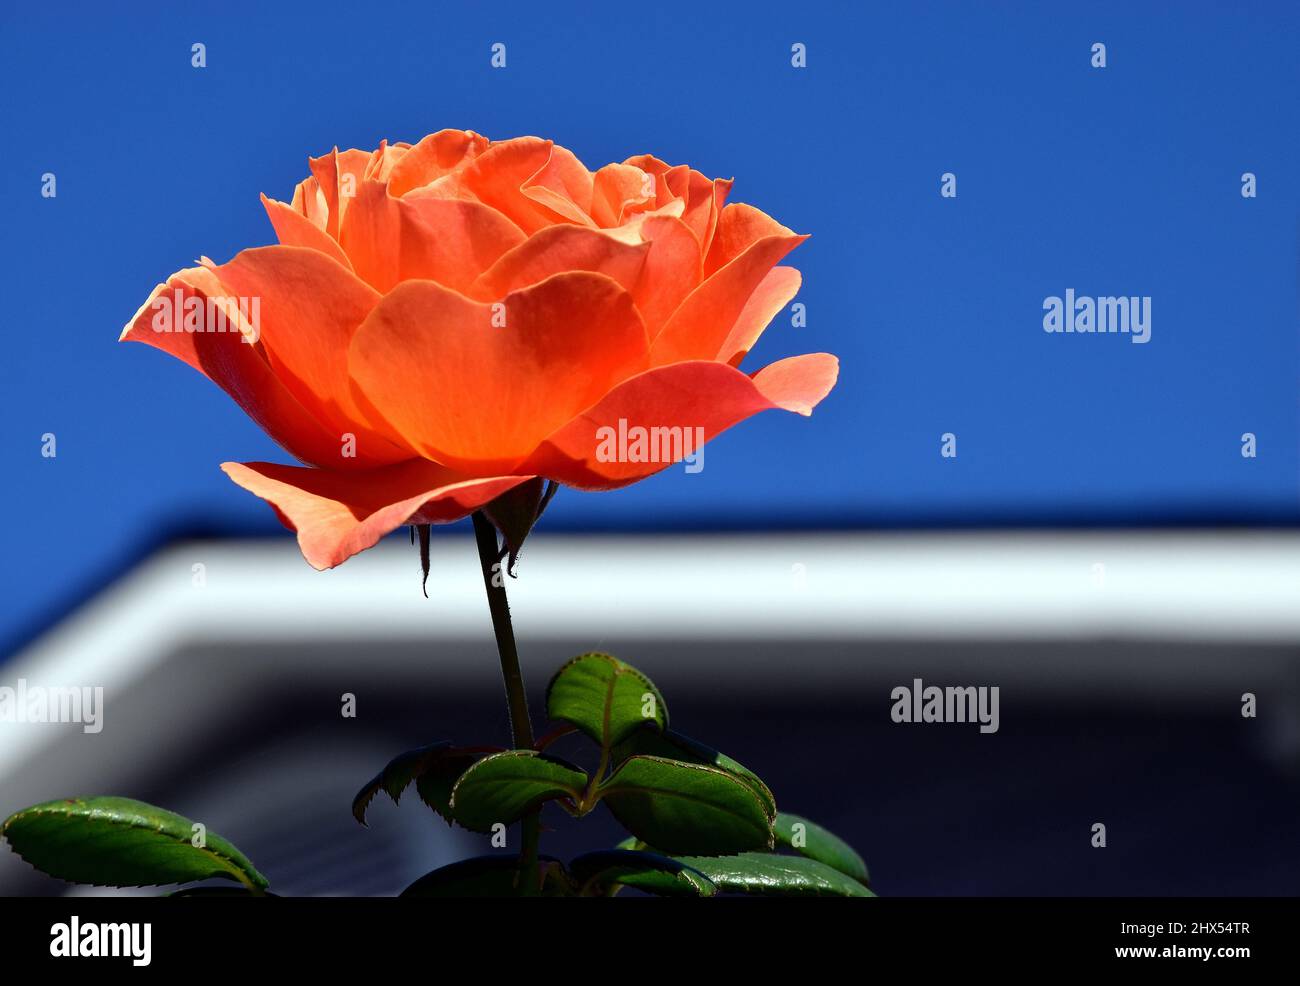 Open Blossom of an Orange Rose with Leaves Against a Bright Blue Sky and the White Edge of a Roofline Stock Photo